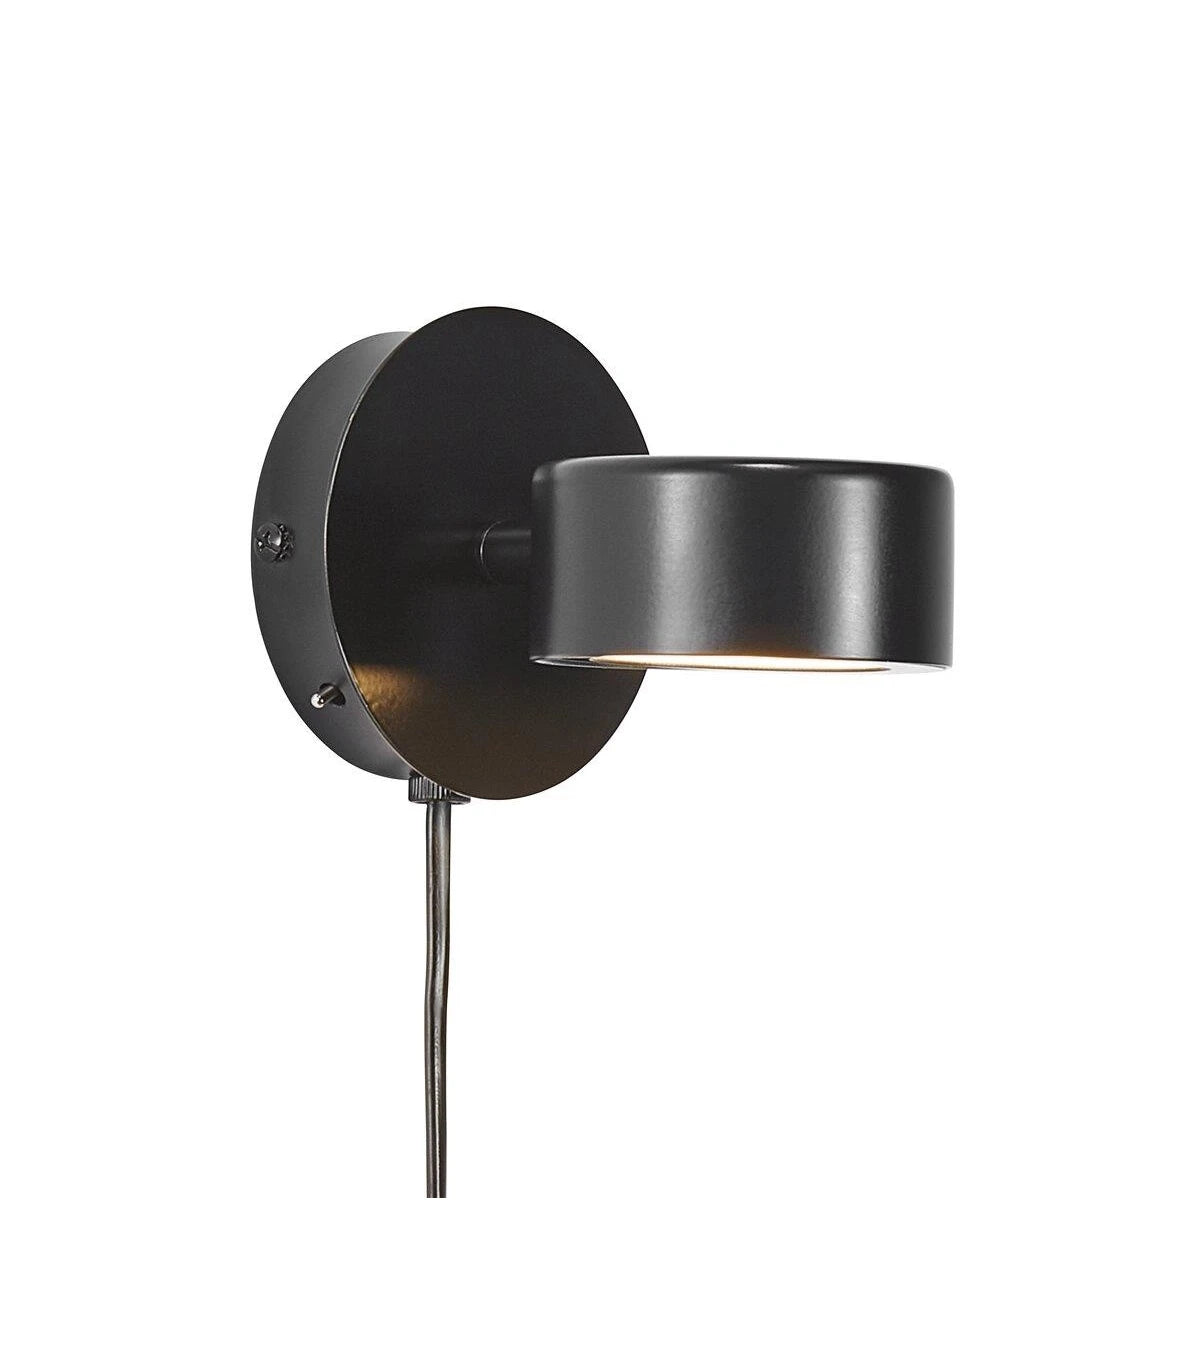 Wall lamp CLYDE black